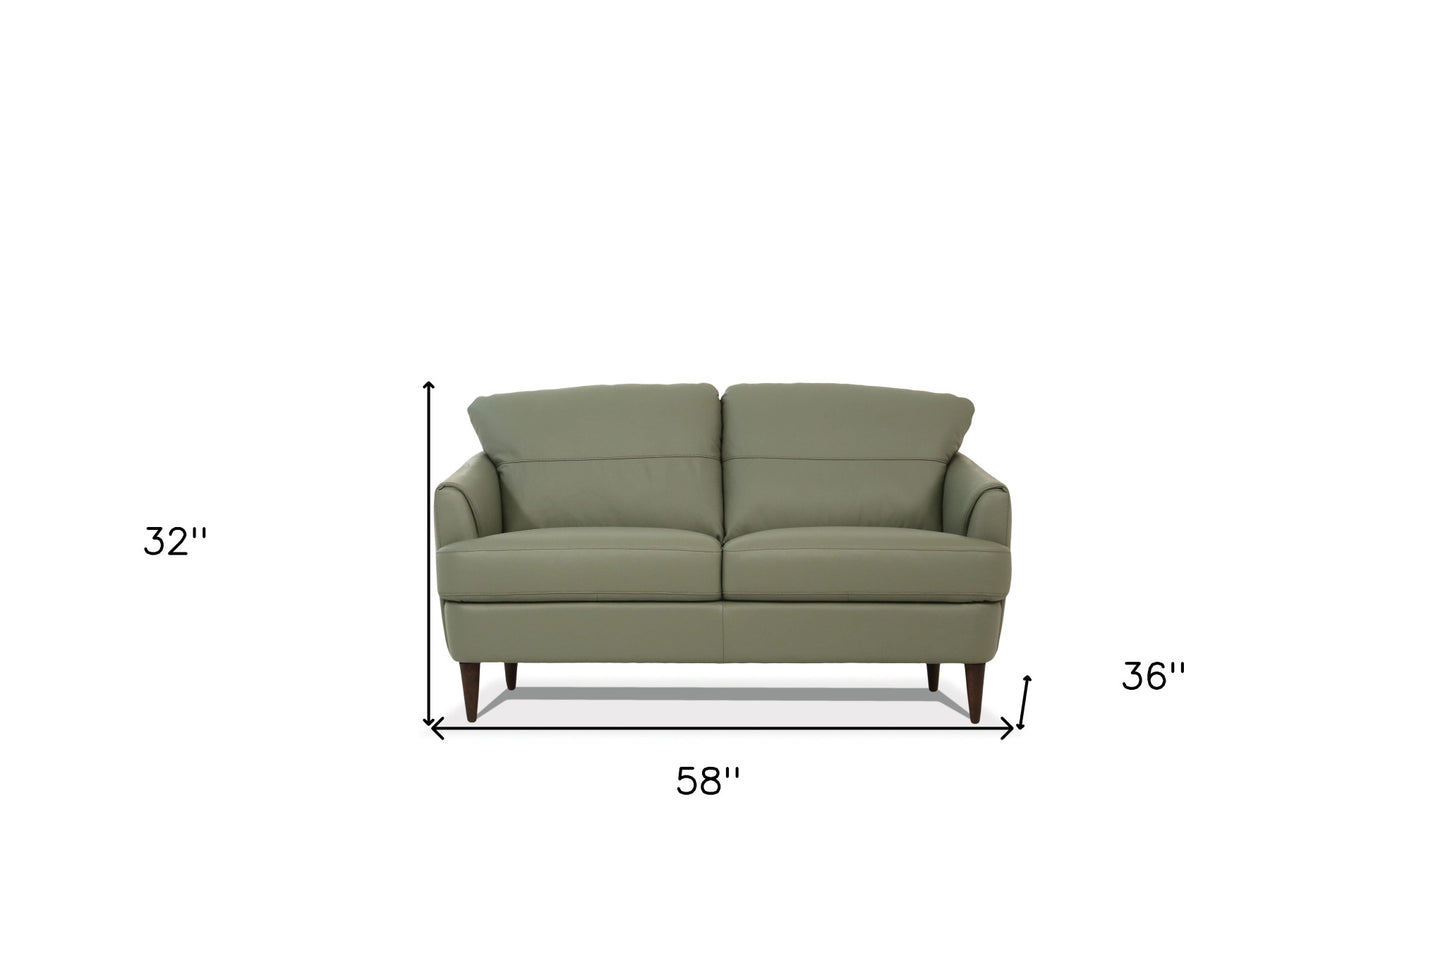 58" Green And Brown Leather Love Seat